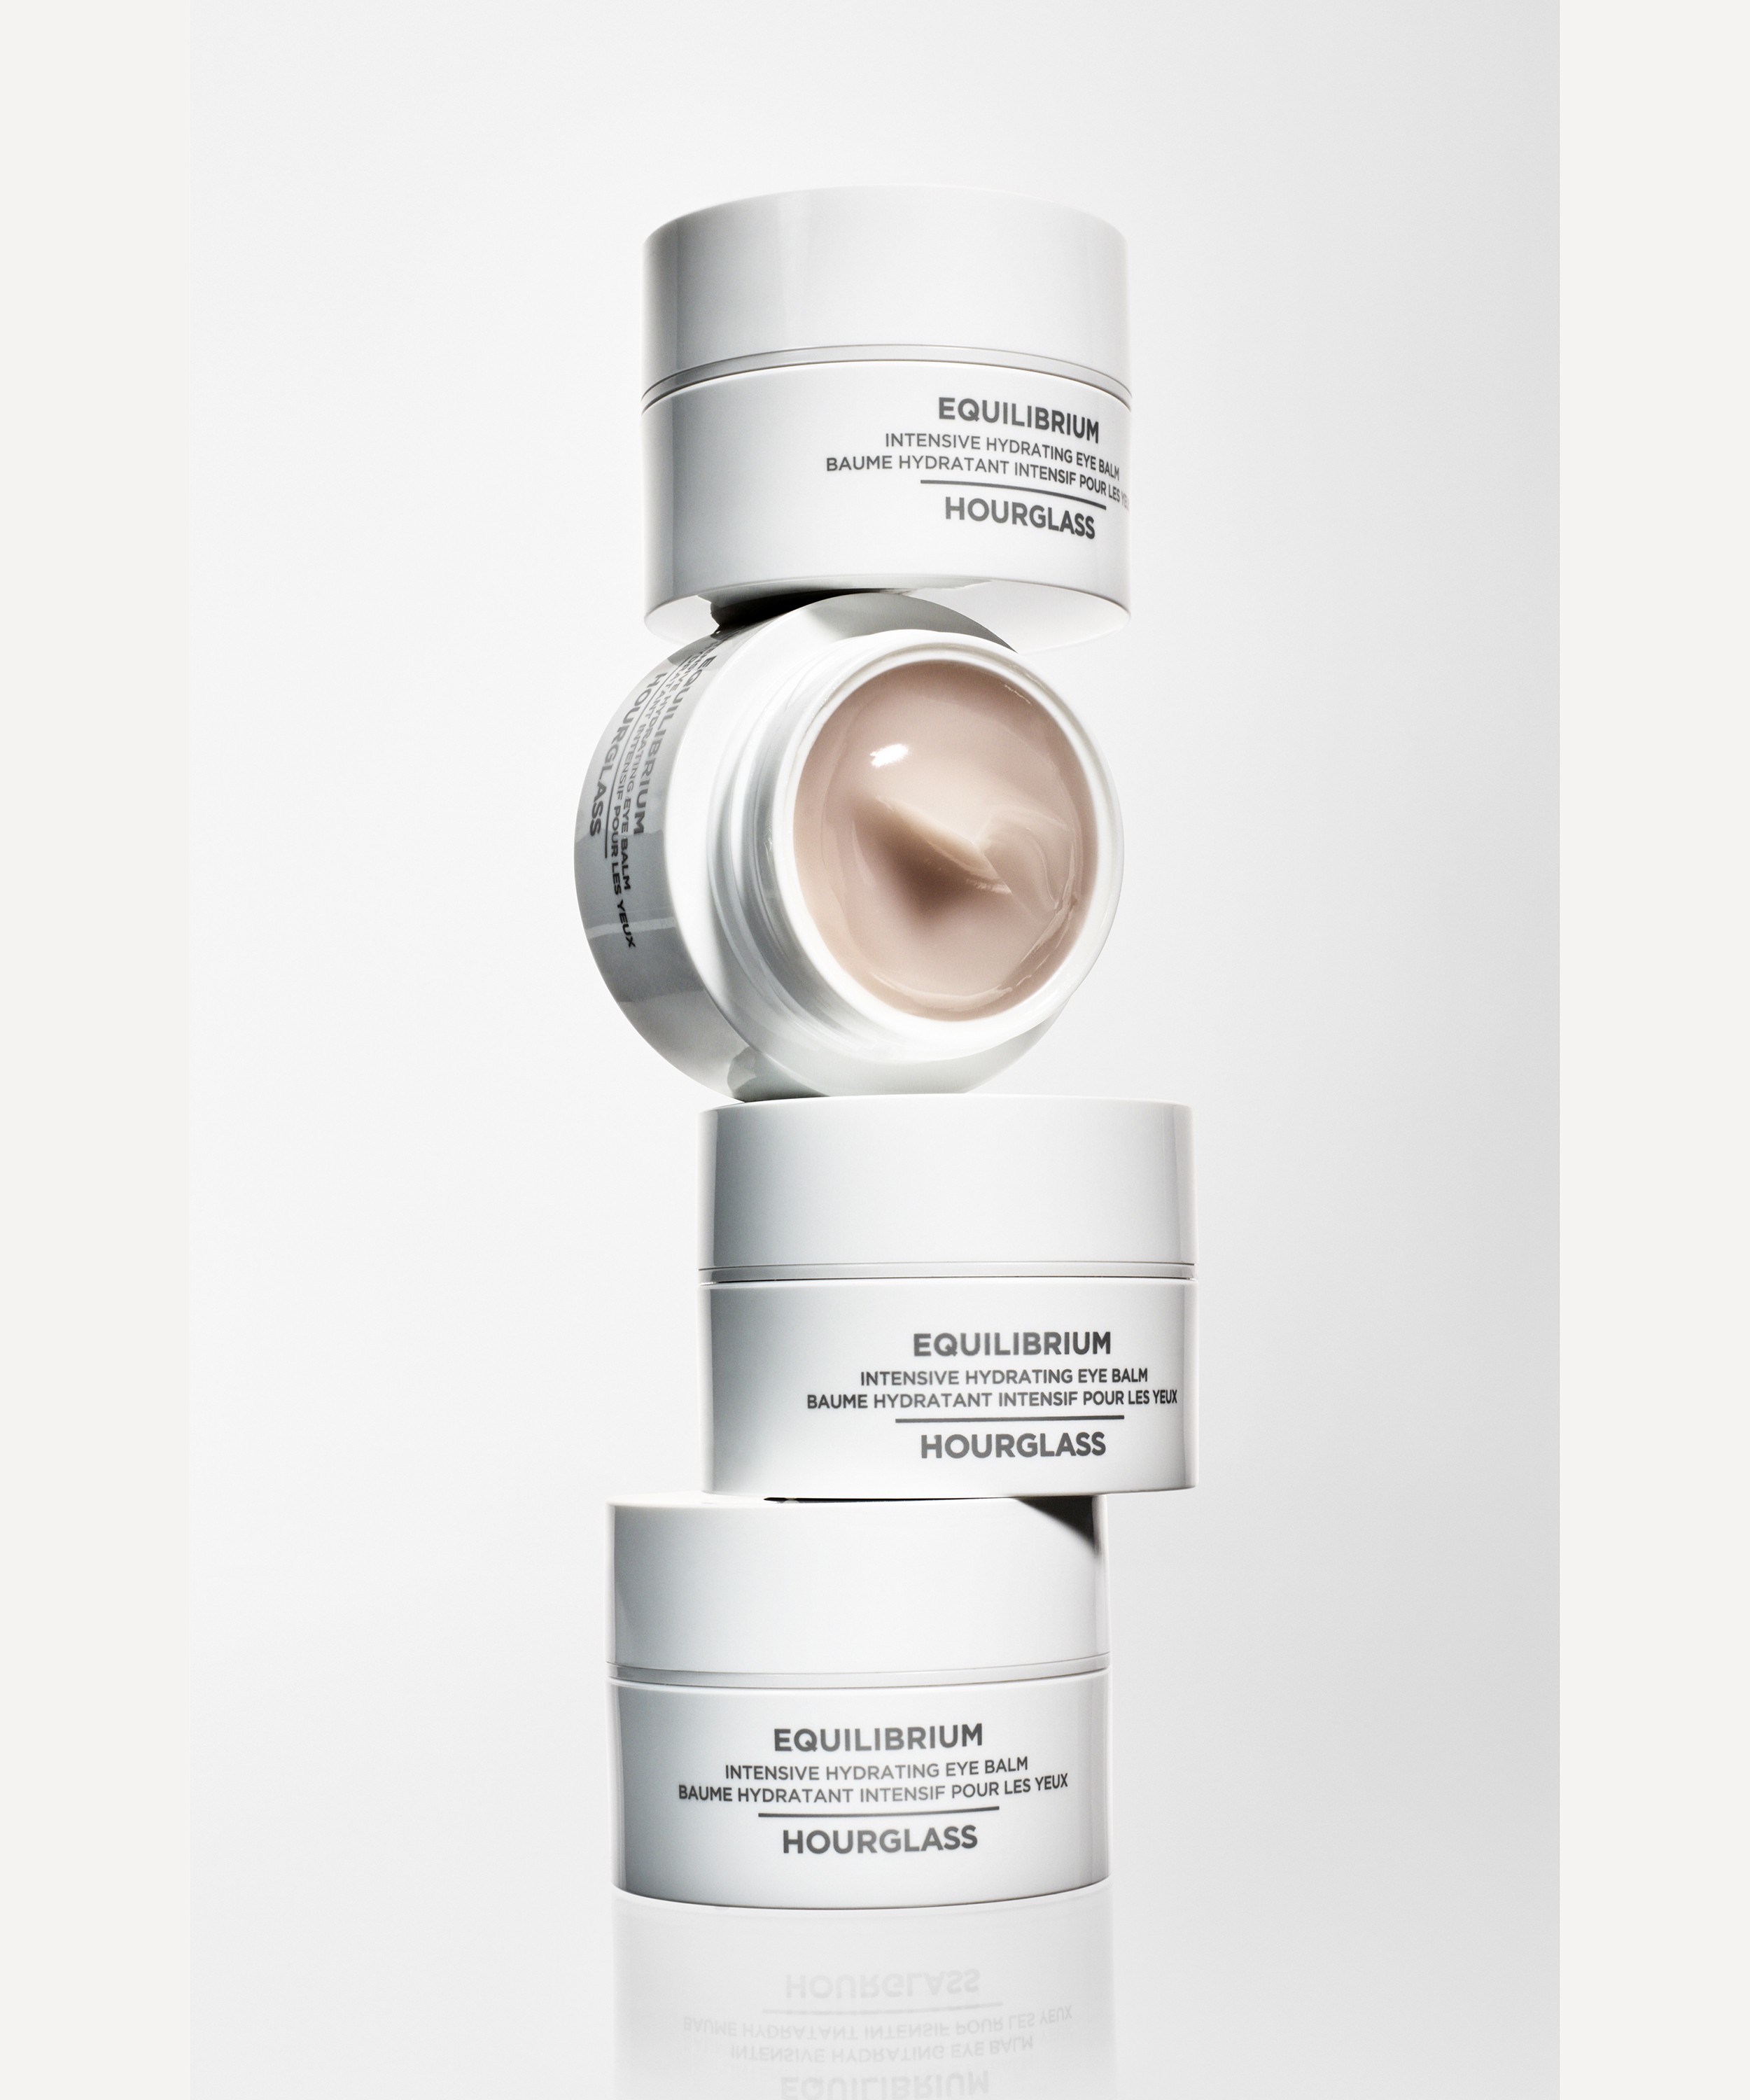 Hourglass - Equilibrium Intensive Hydrating Eye Balm 16.3g image number 2